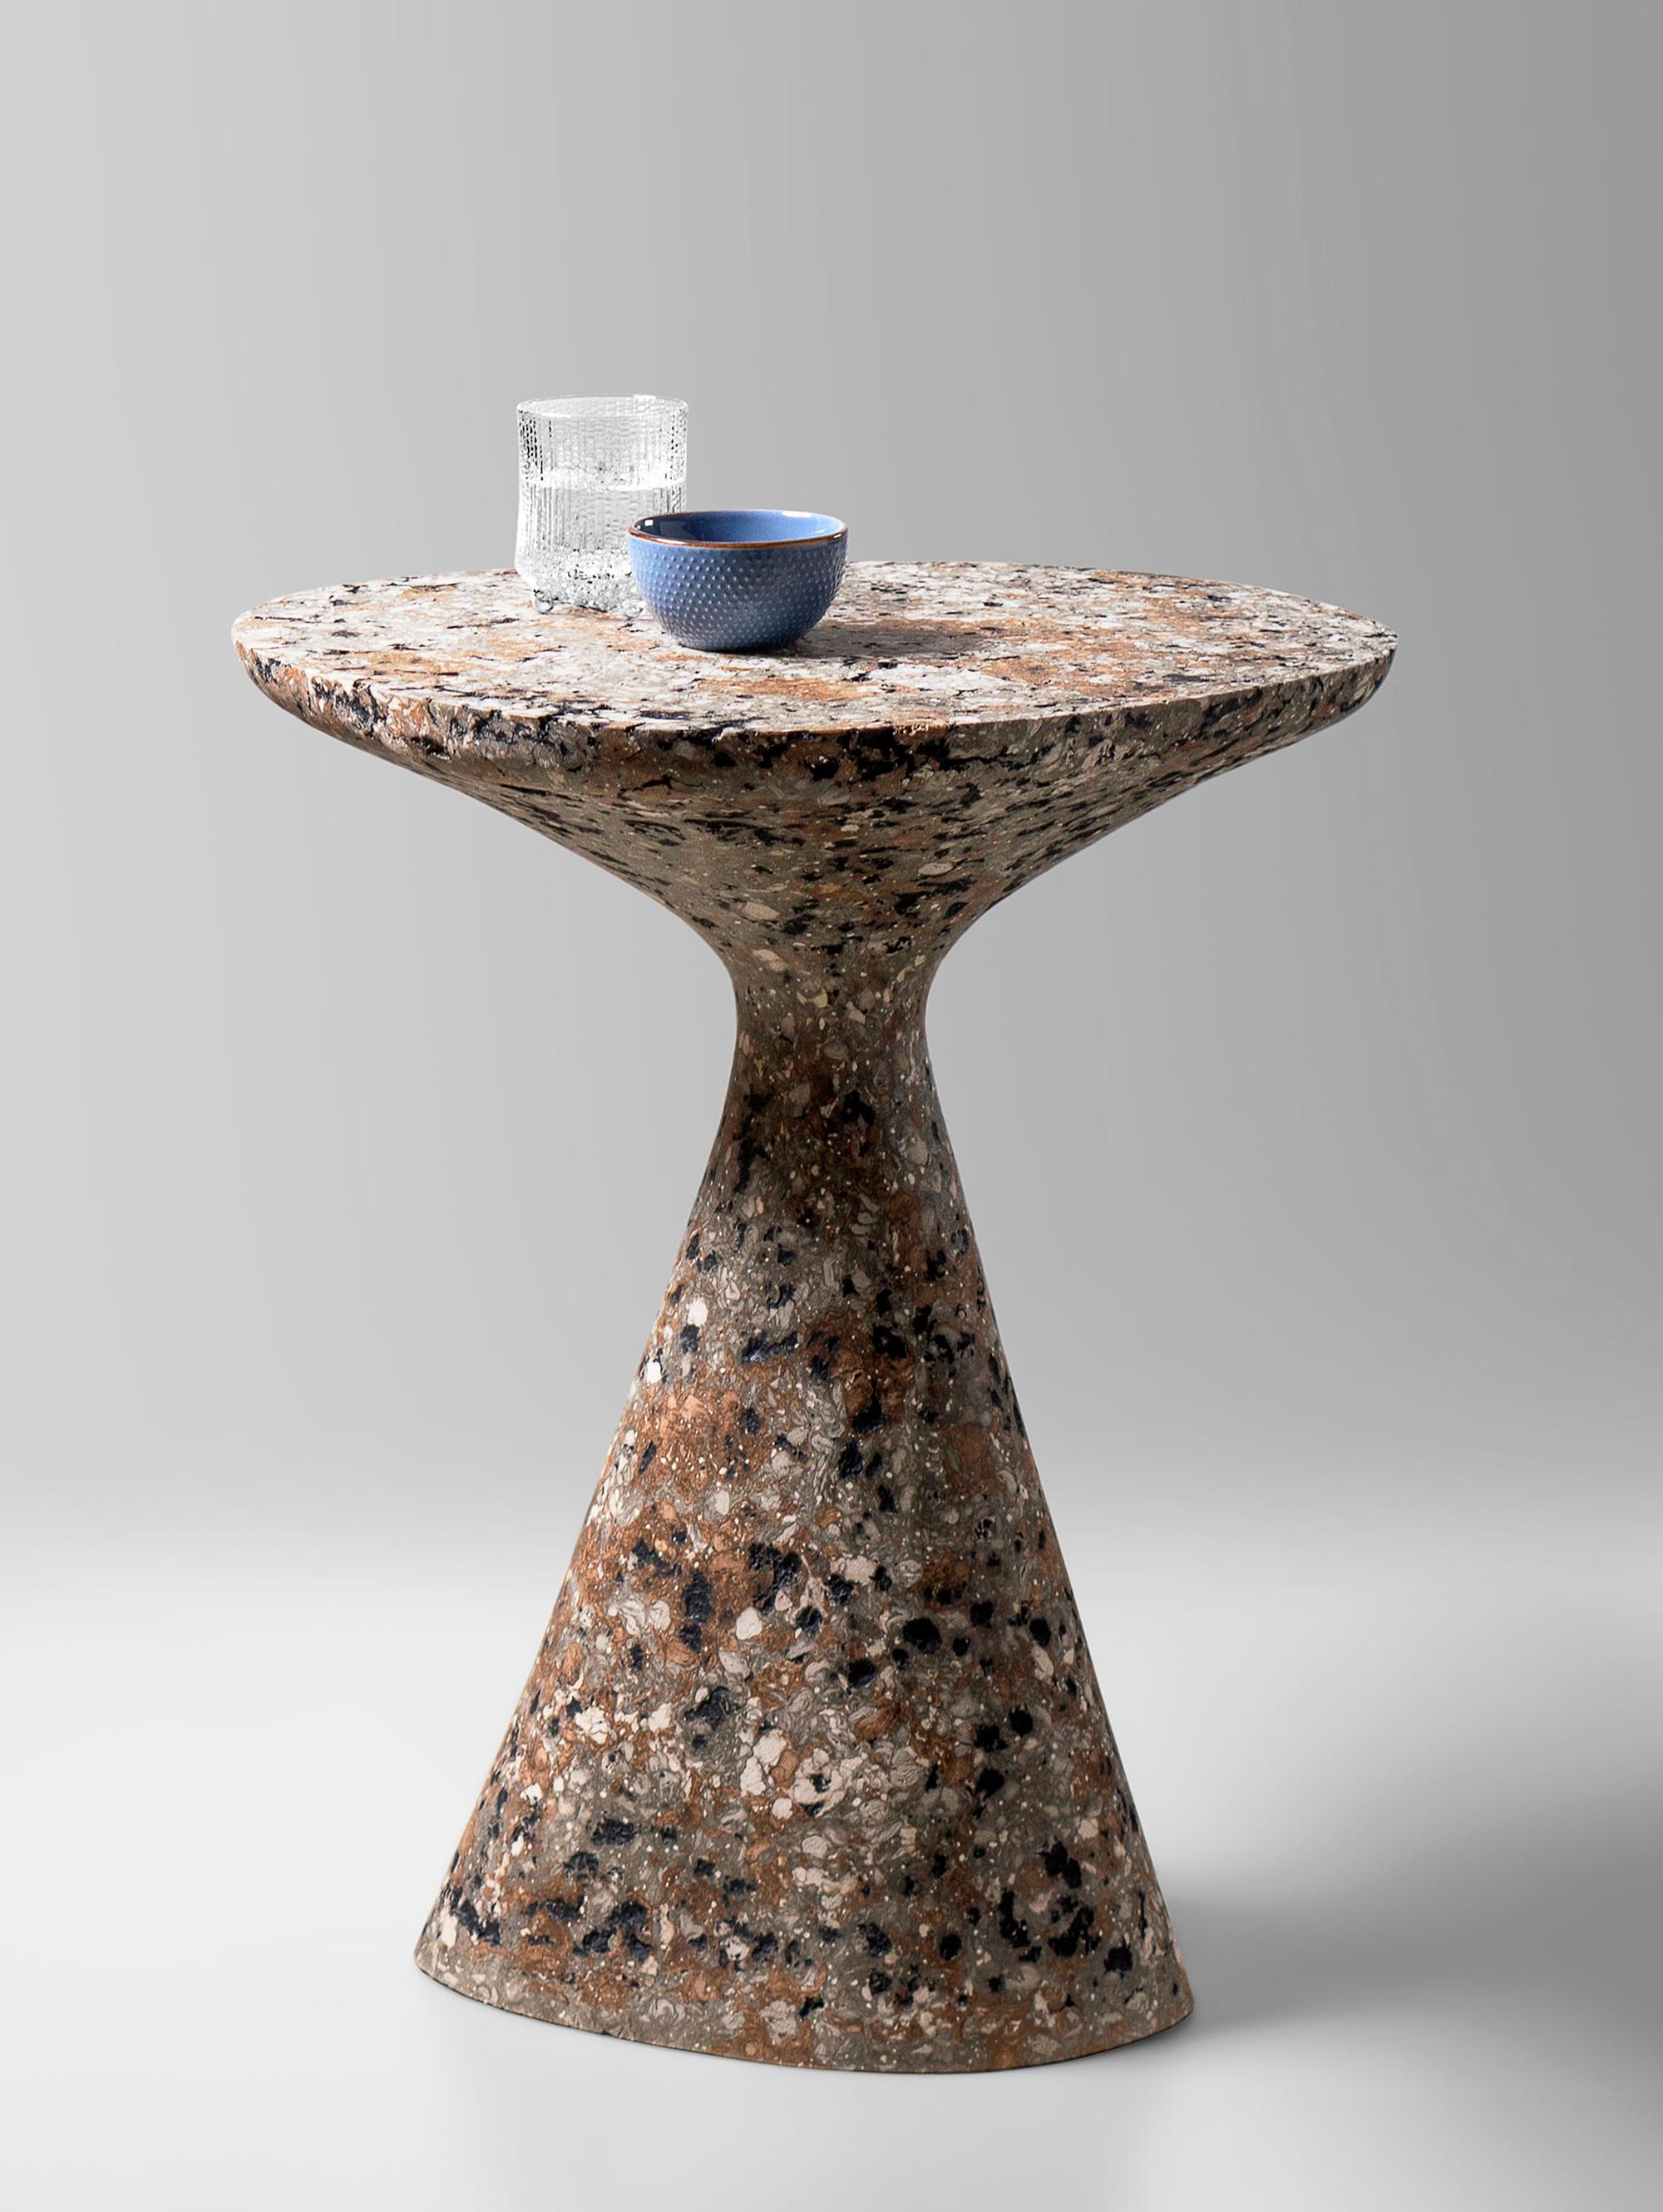 Mottled Side Table by Kasanai
Dimensions: D 46 x H 61 cm.
Materials: Concrete, recycled cardboard, glue, paint.
6 kg.

The fusion of sturdiness and elegance, along with the blend of archaism and modernity. More than just a surface for placing